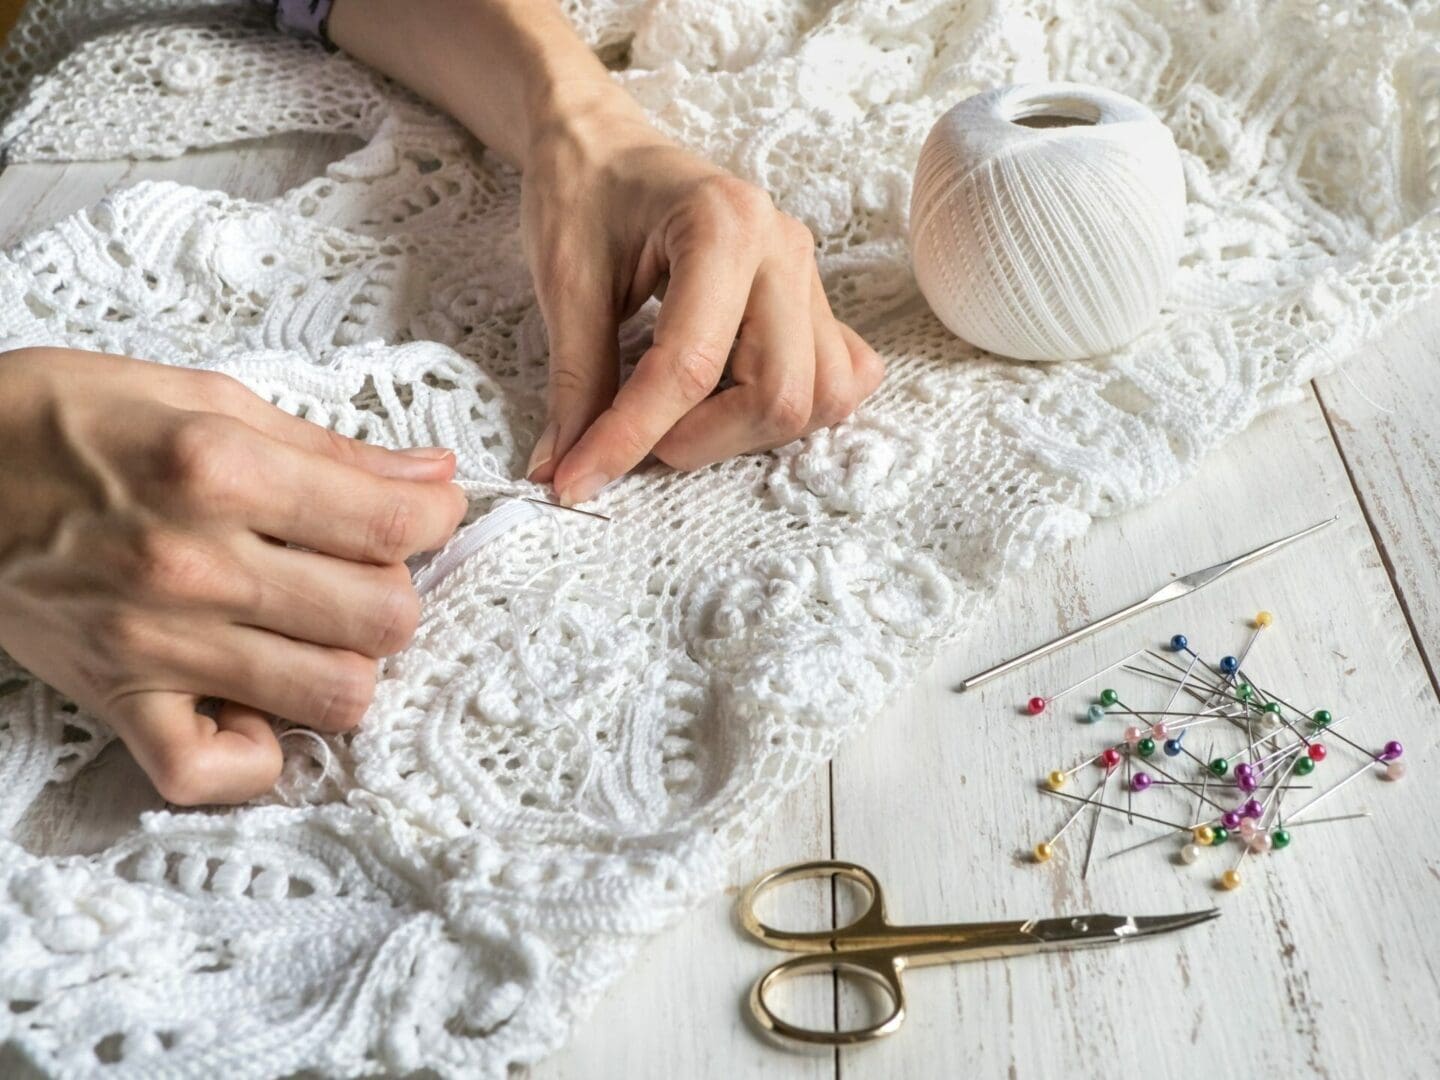 A woman's hands are working on a white crocheted blanket, while wondering how long dry cleaning a wedding dress takes.